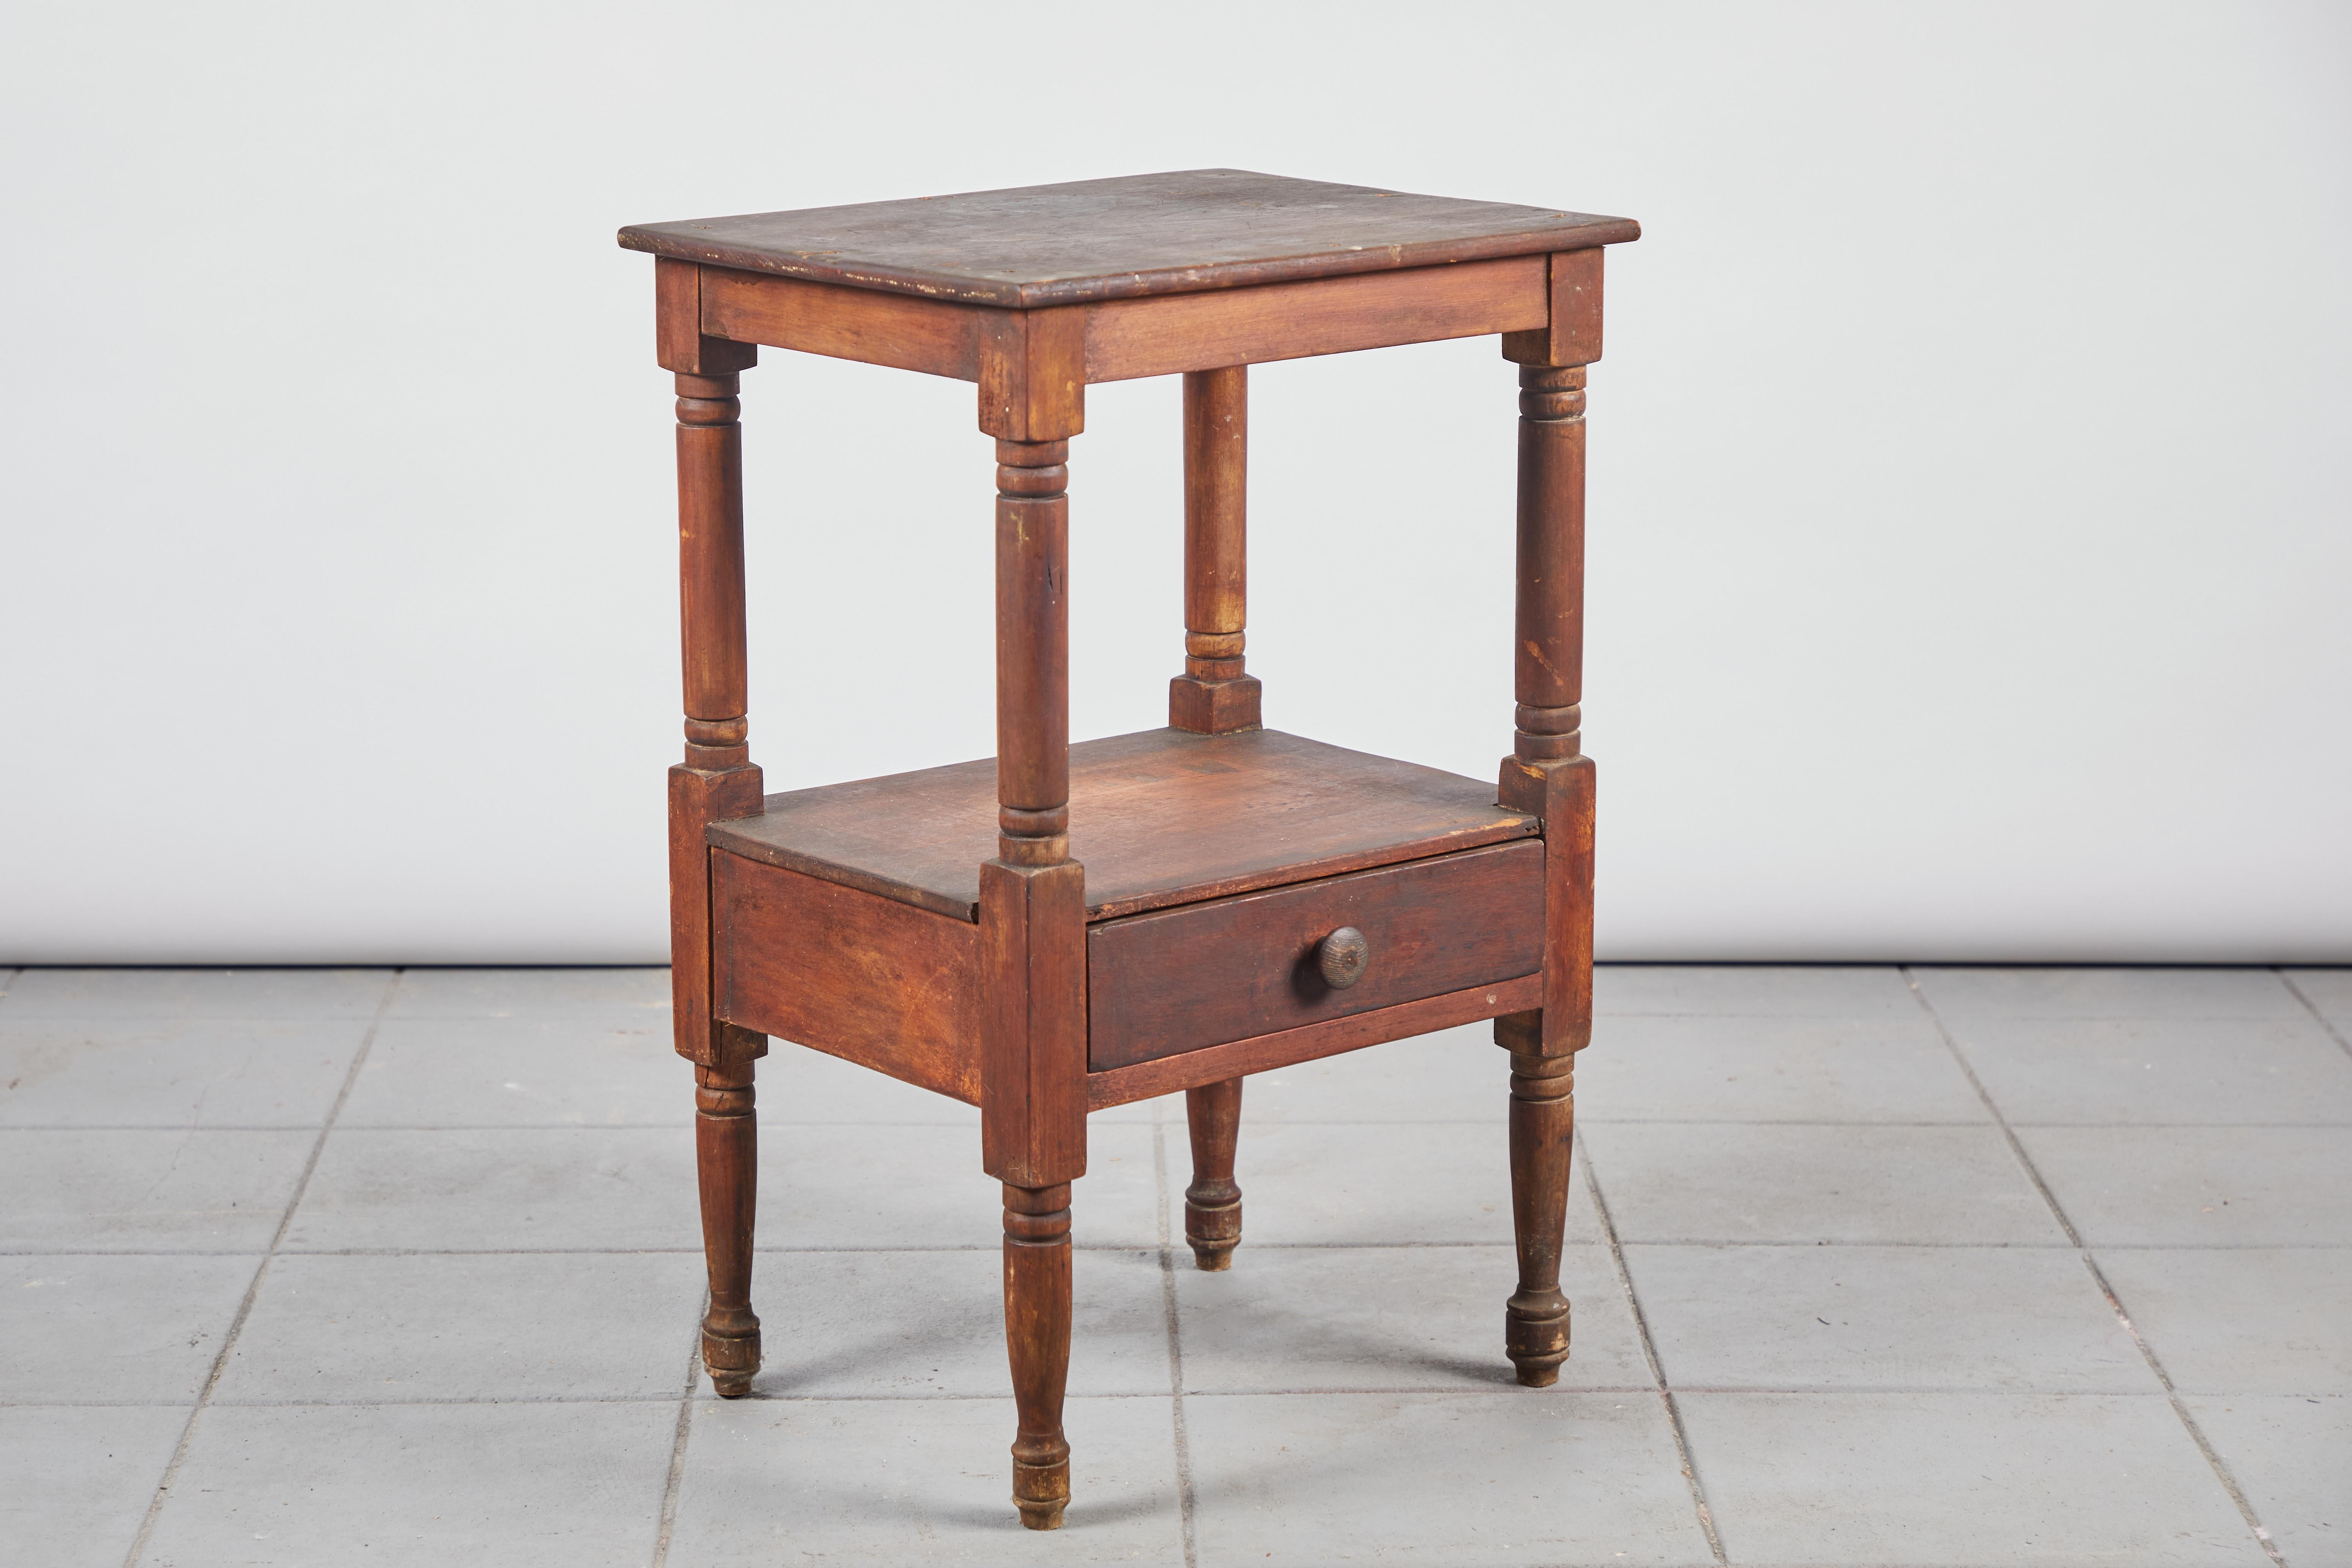 Early American rustic side table with turned legs and a lower shelf that offers a single drawer.